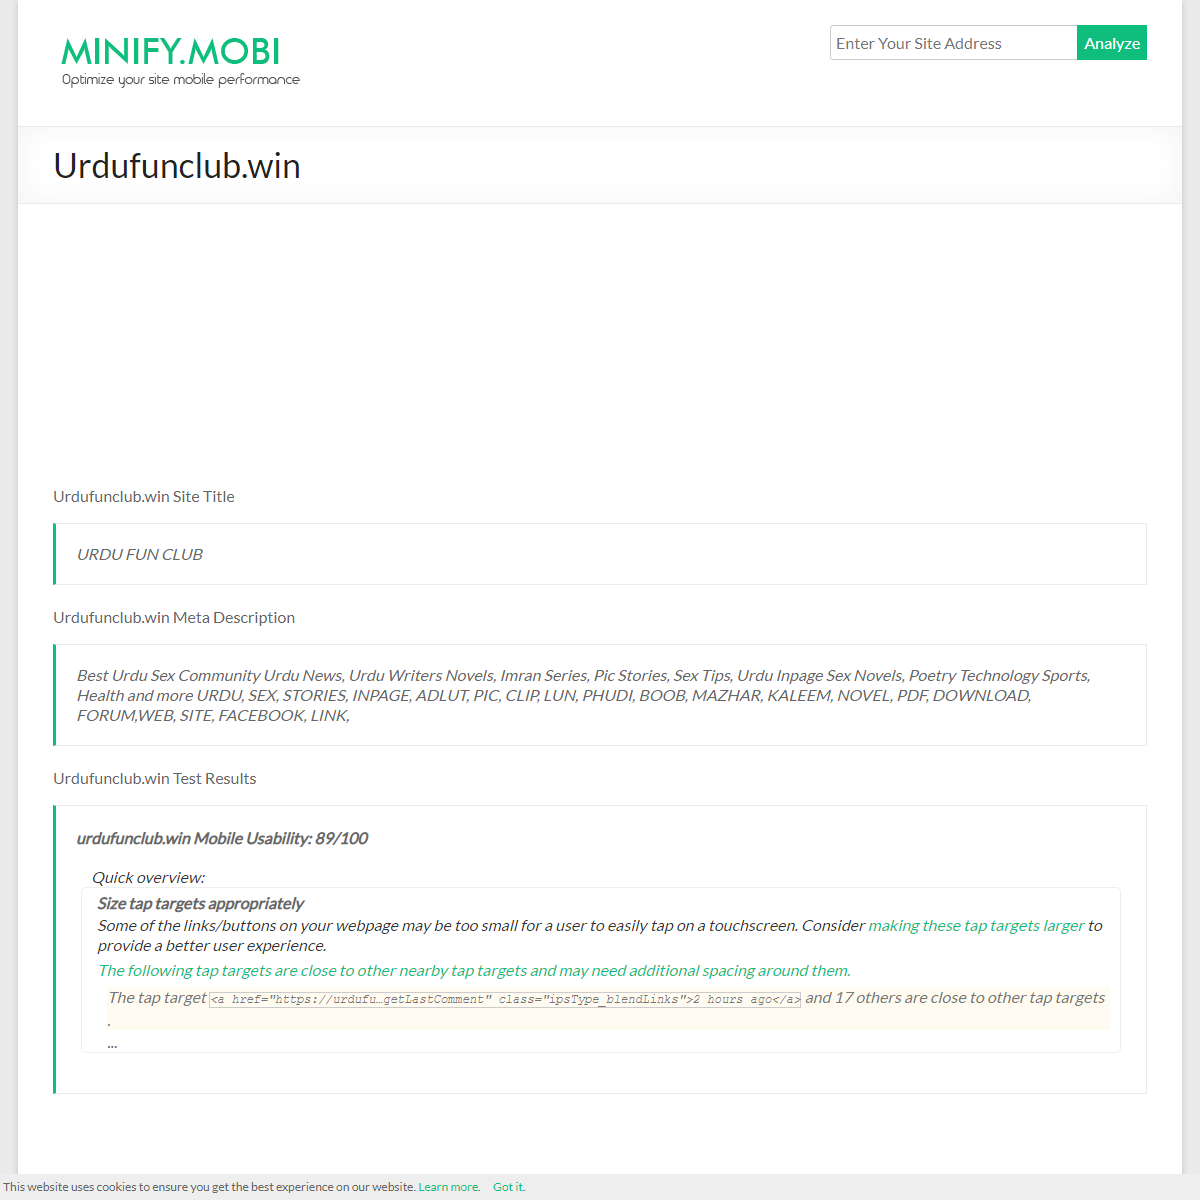 A complete backup of https://minify.mobi/results/urdufunclub.win